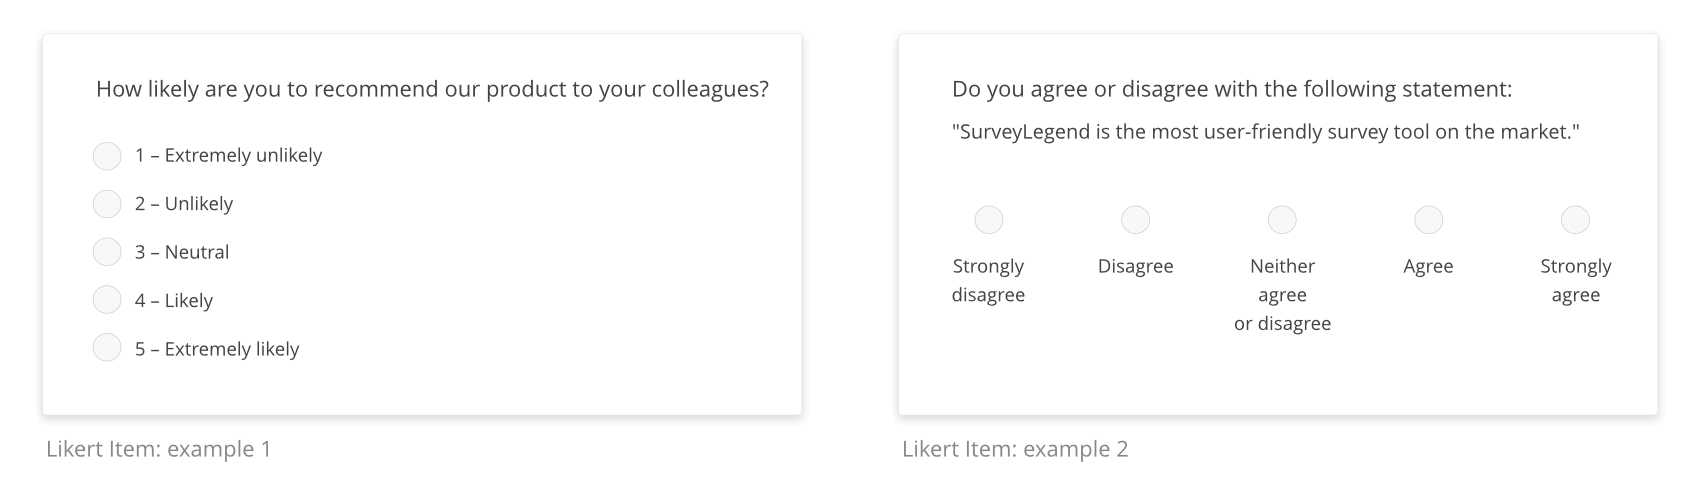 These are examples of Likert Items. Likert Items could look visually different.